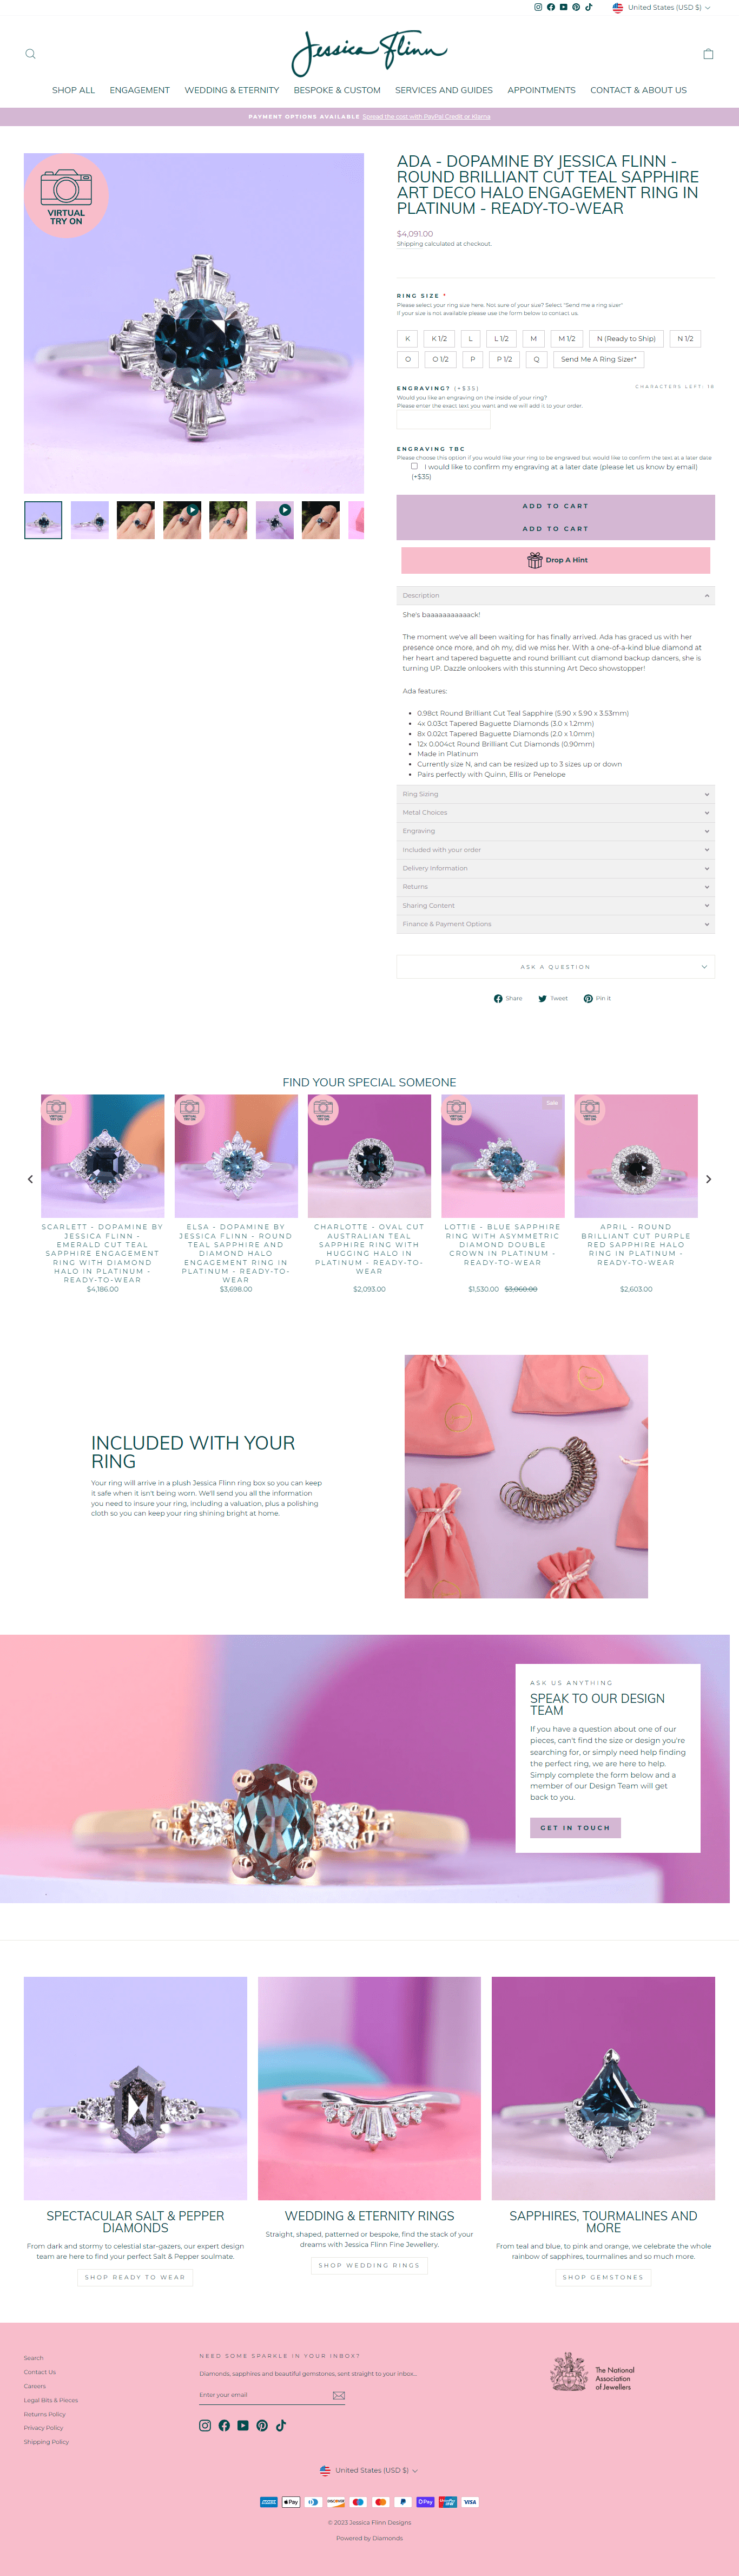 Jessica flin product page